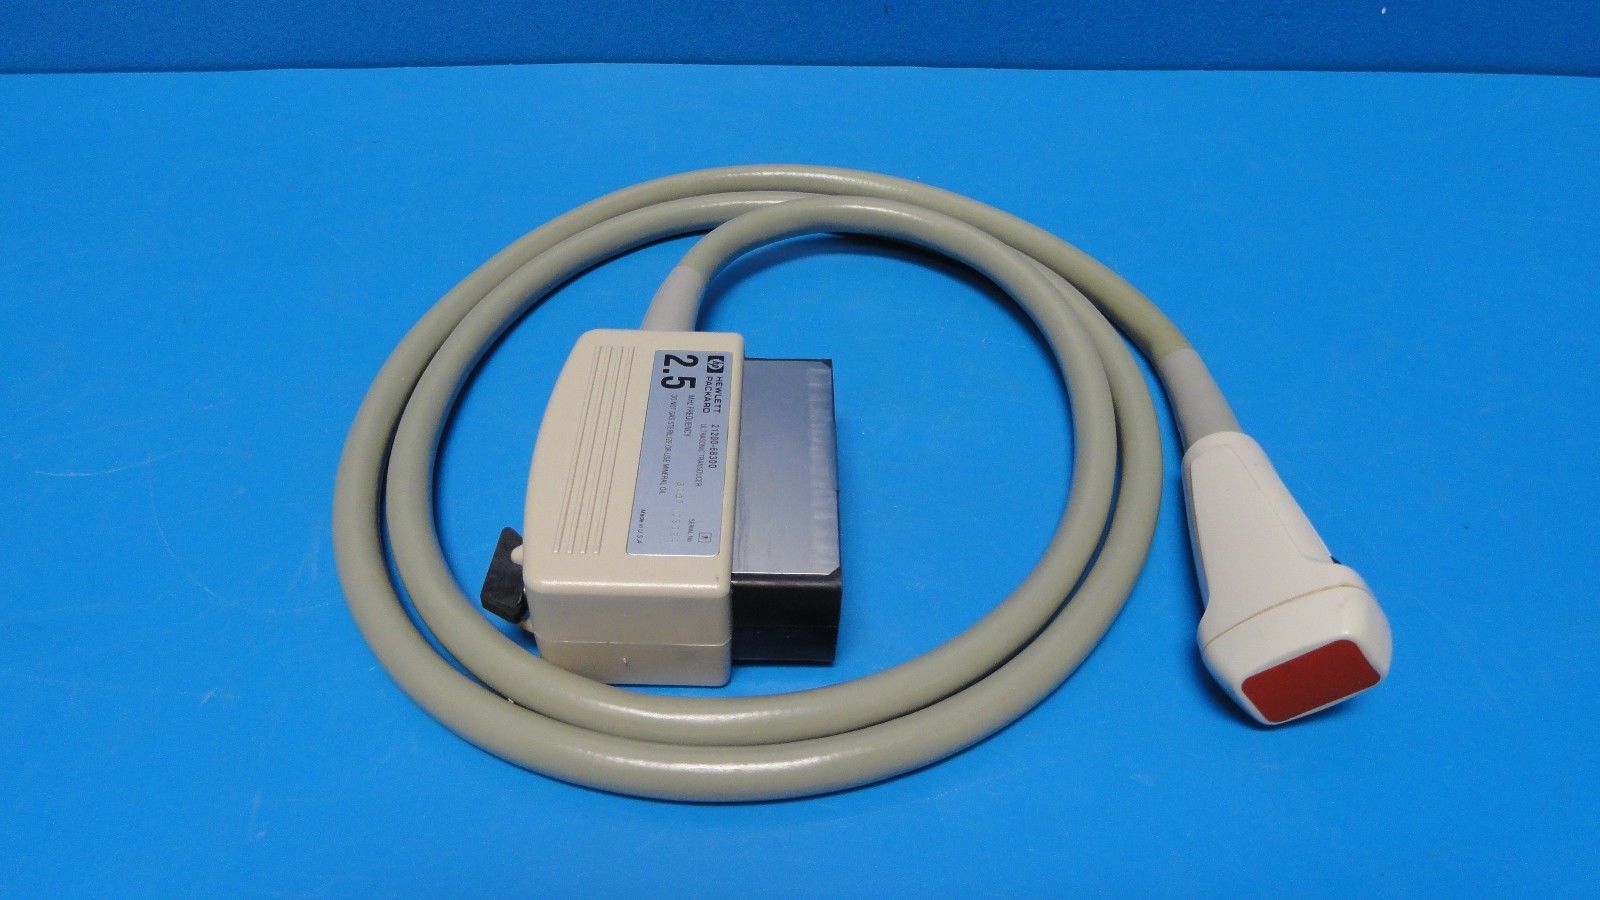 HP 21200 - 68300 Phased Array 2.5 MHz Probe for Sonos 1000 & 1500 (7042) DIAGNOSTIC ULTRASOUND MACHINES FOR SALE